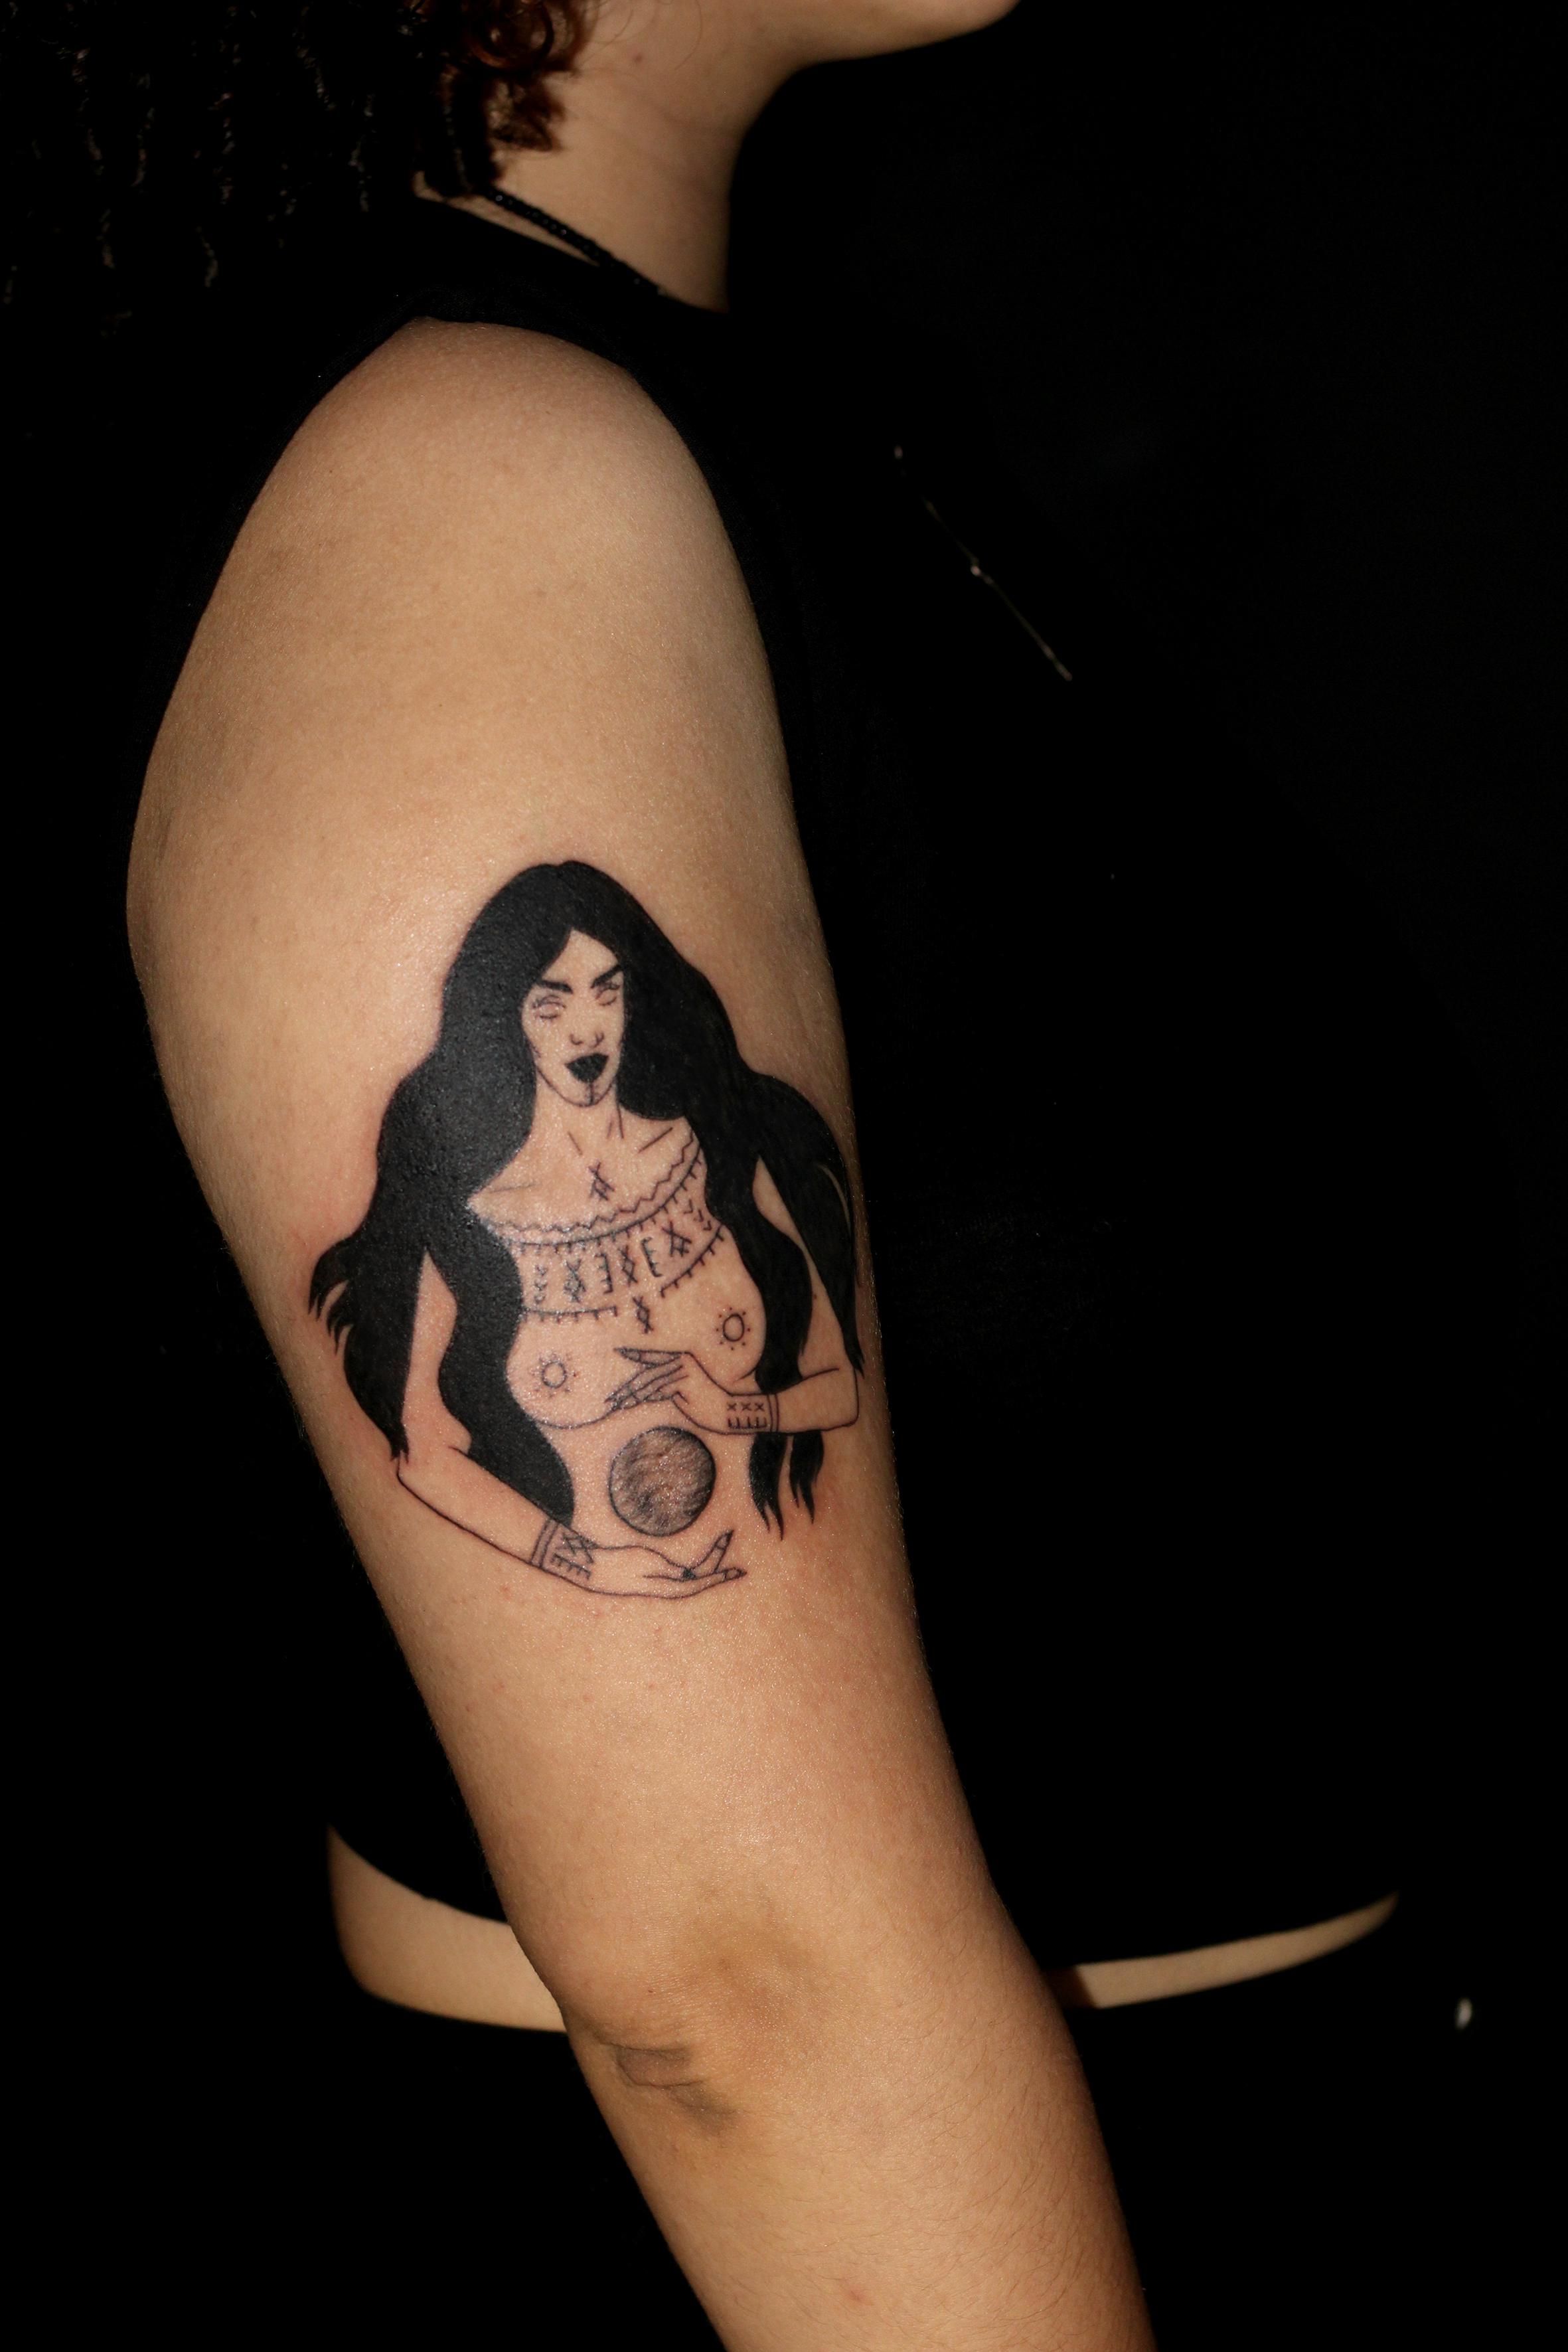 Side photo of tattoo on an arm featuring a women with long hair.